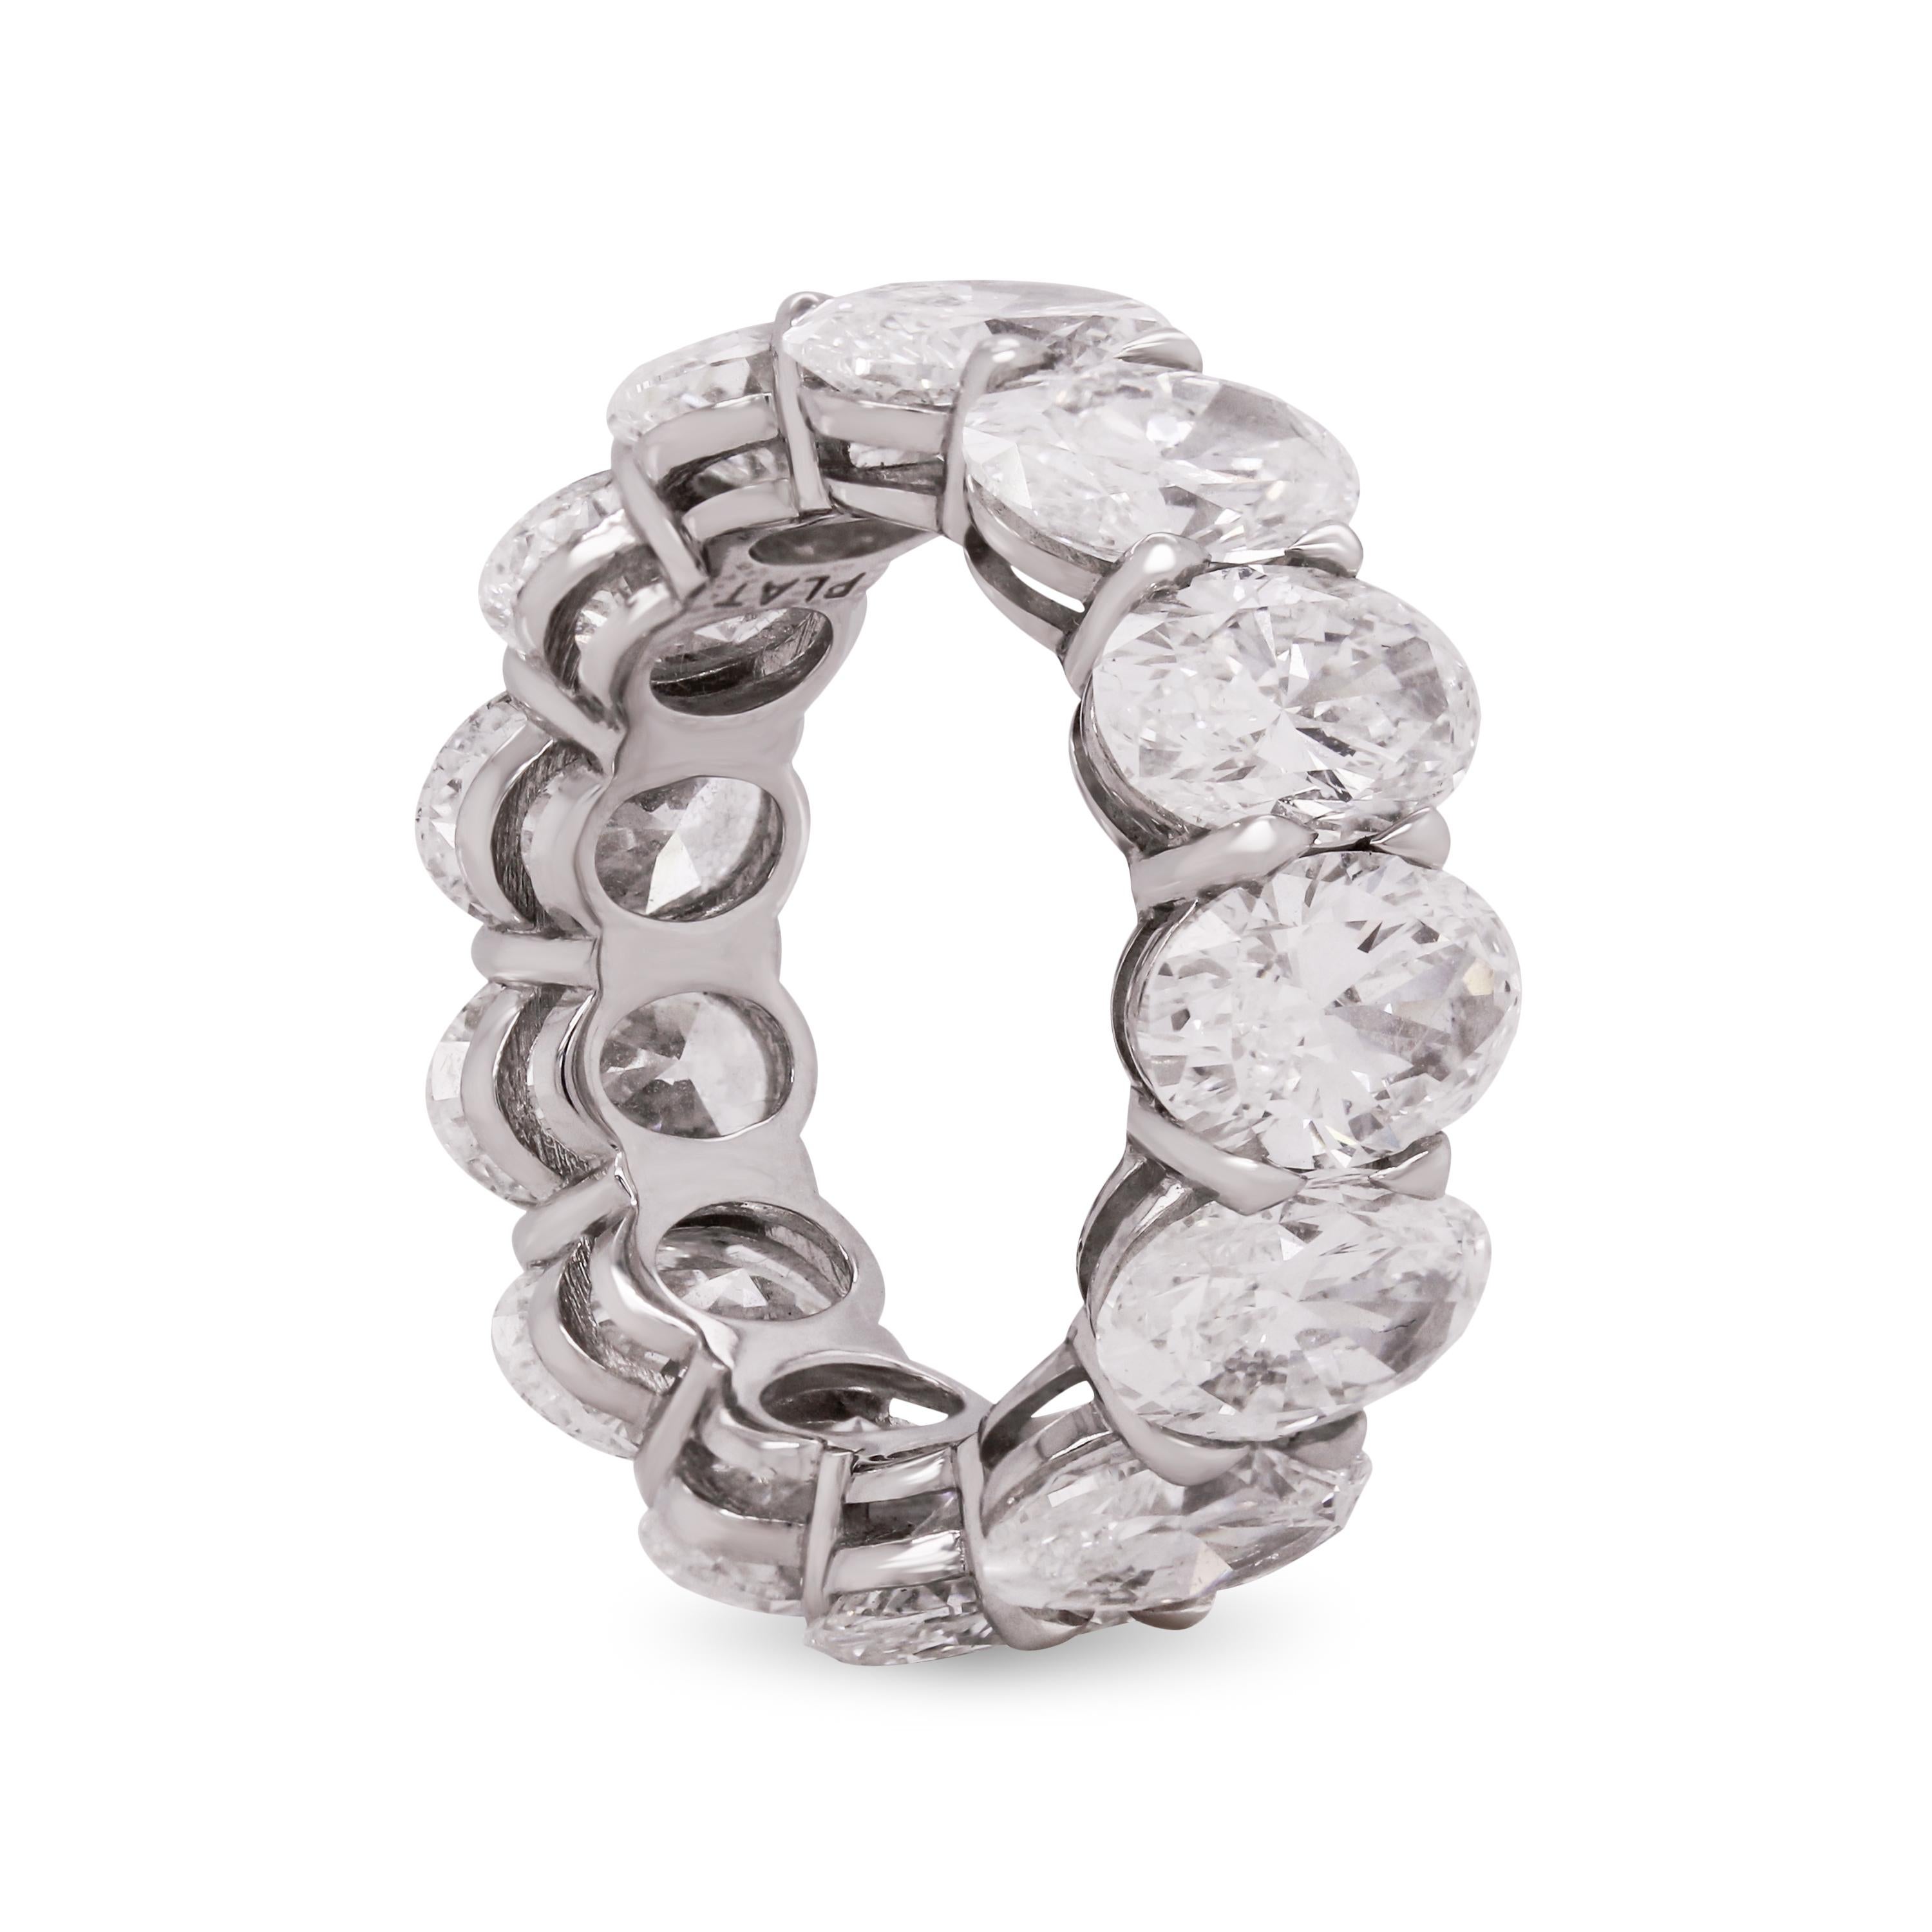 9.86 Carat Oval Cut Diamonds Sharing Prong Platinum Eternity Band

Crafted in Platinum, showcasing 13 oval-cut diamonds weighing 9.86 carats total. Diamonds range from F-G color, VS2-SI1 clarity. Each diamond was carefully matched. Diamonds average